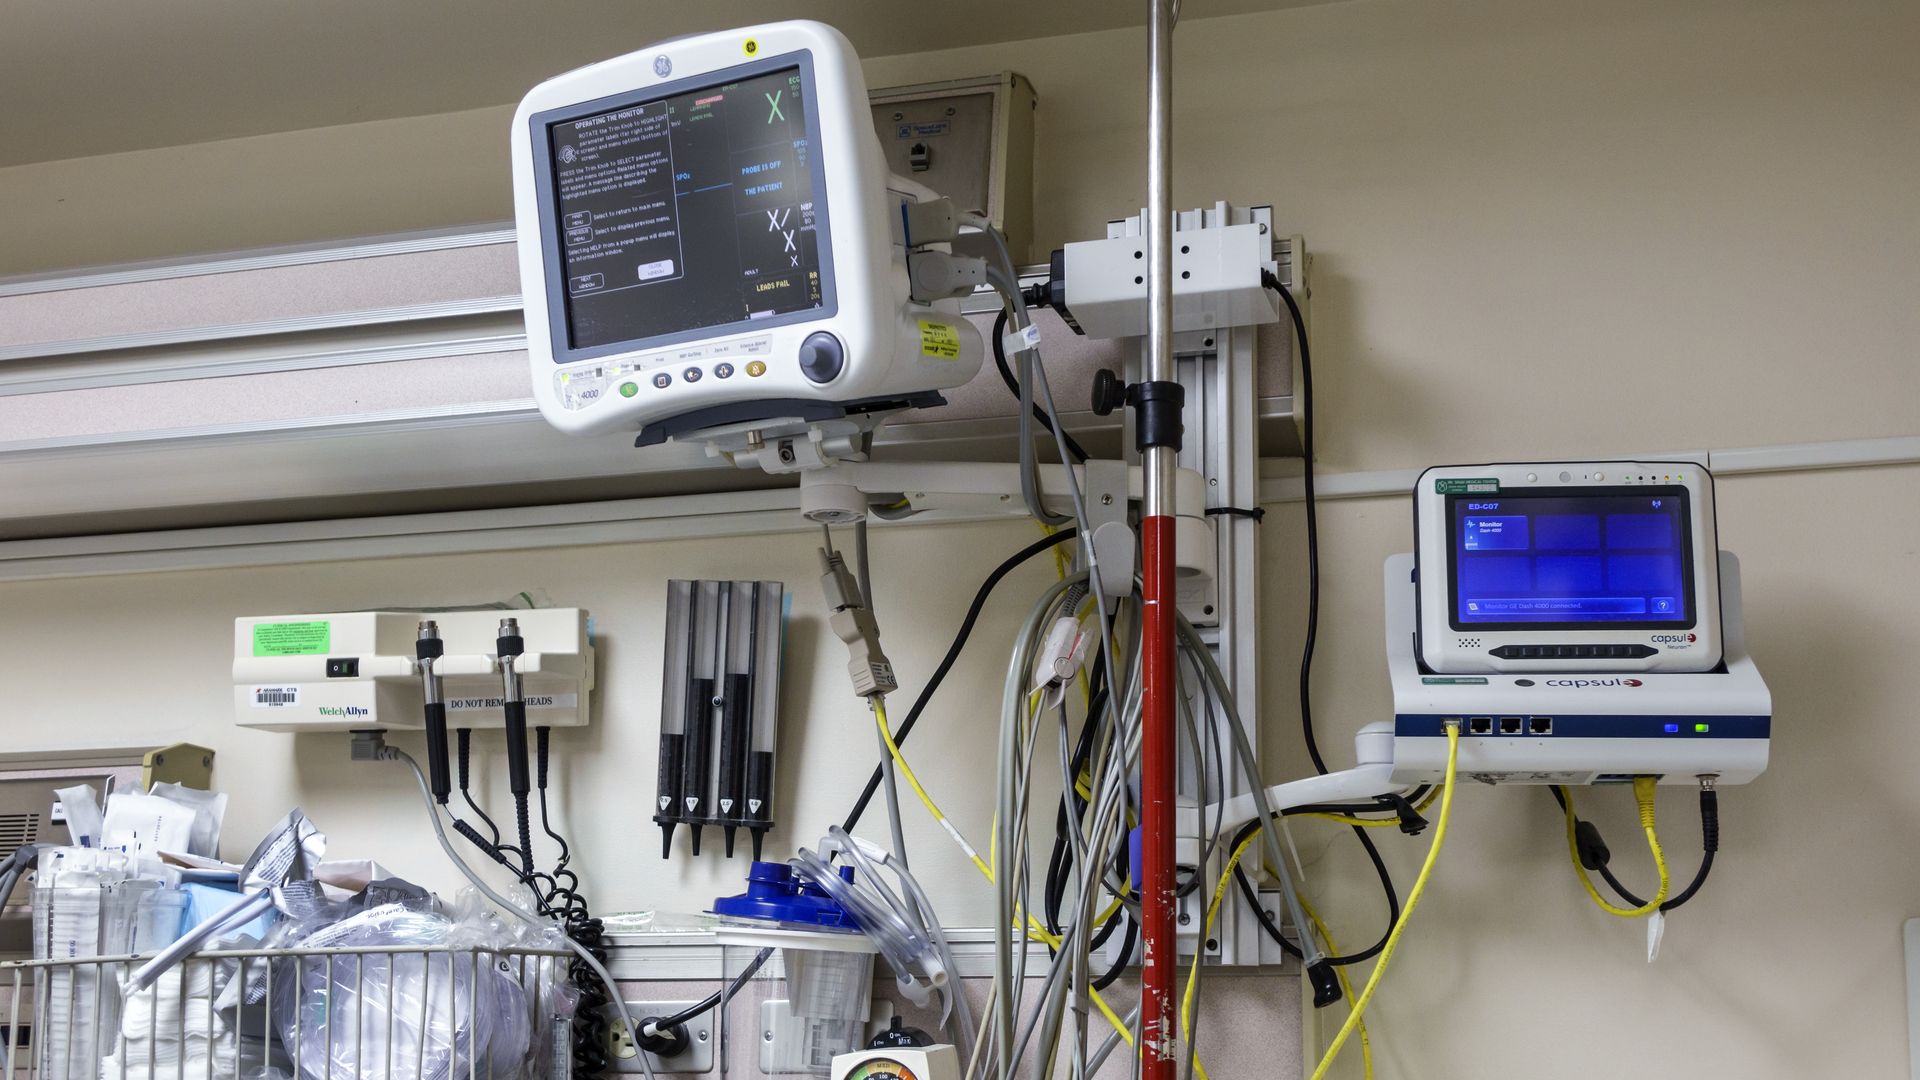 Medical equipment and monitors in a hospital emergency room.